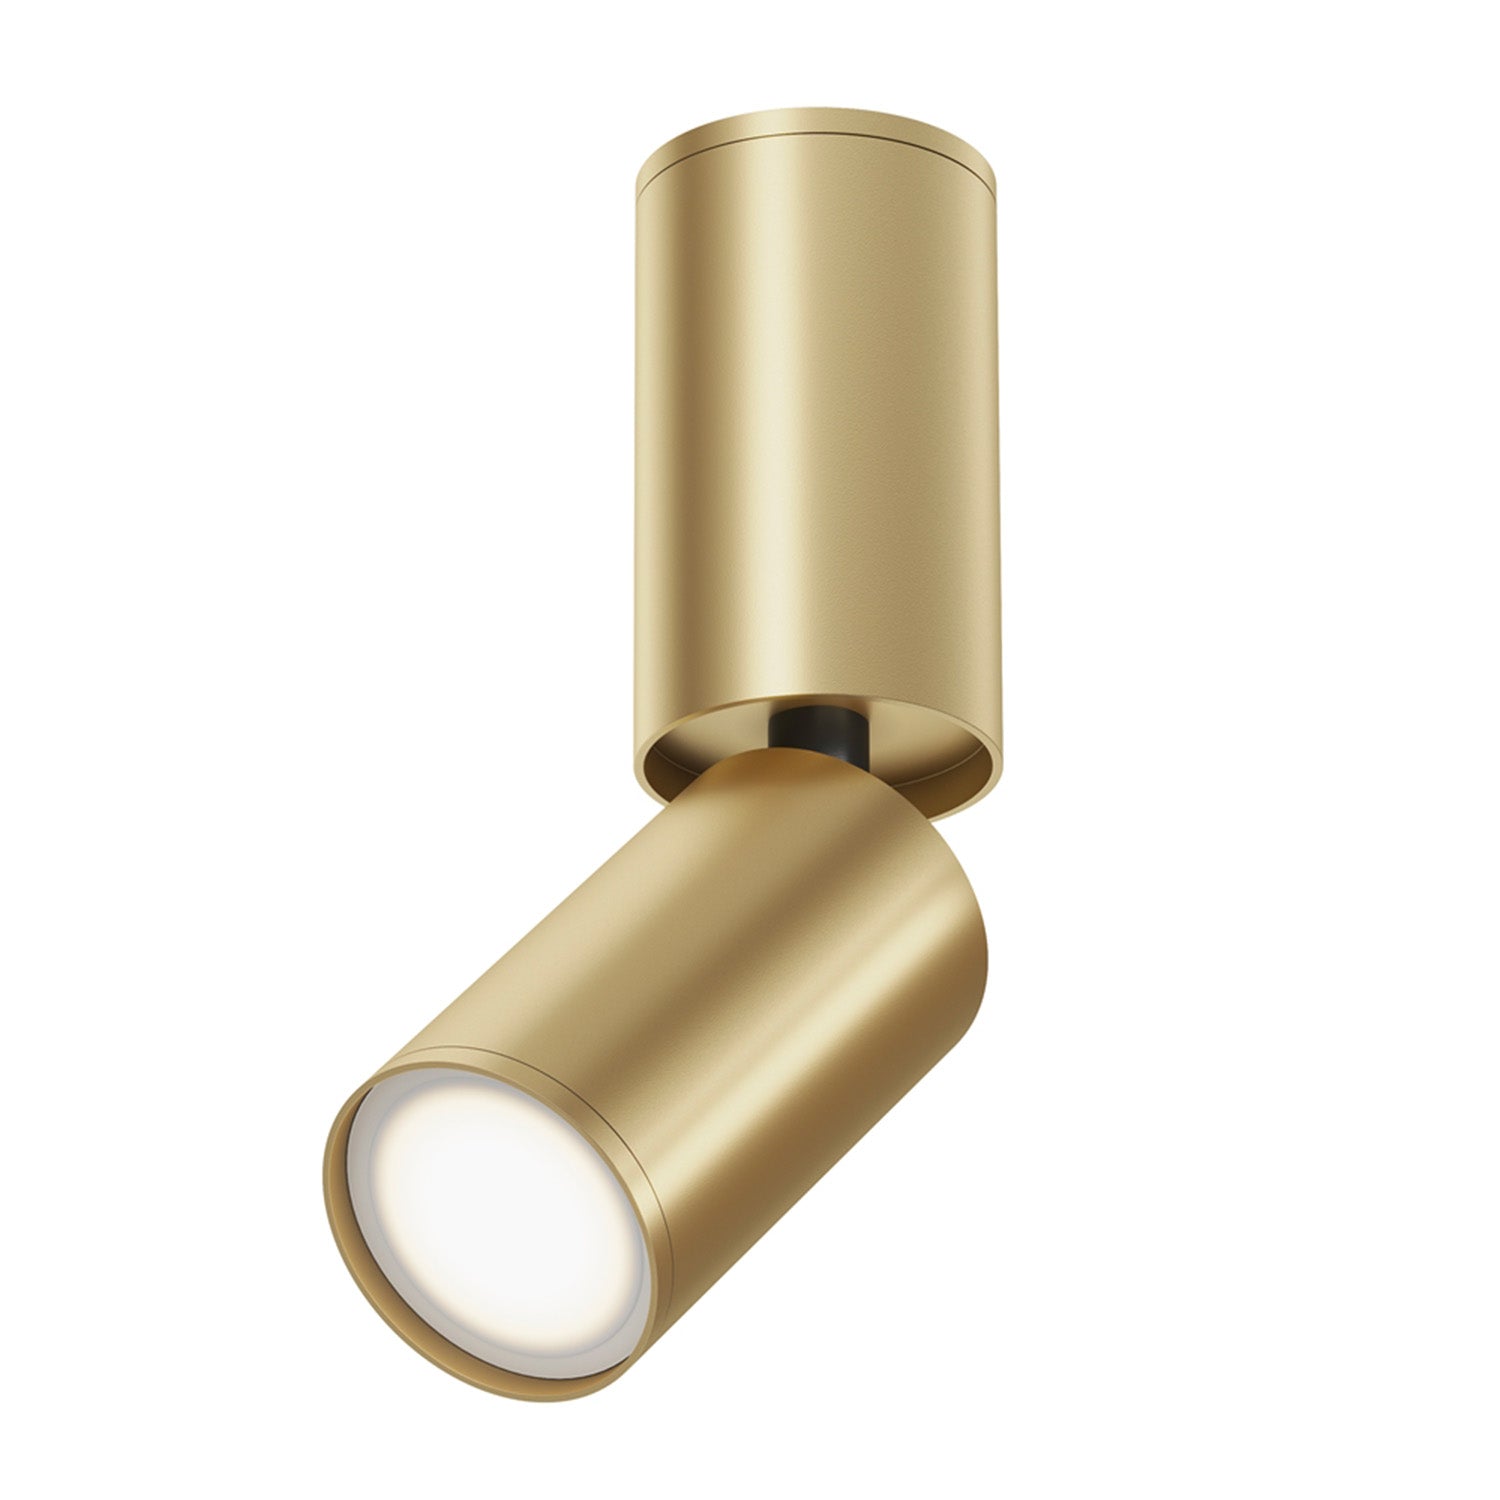 FOCUS S - Adjustable wall spotlight in gold, black or white